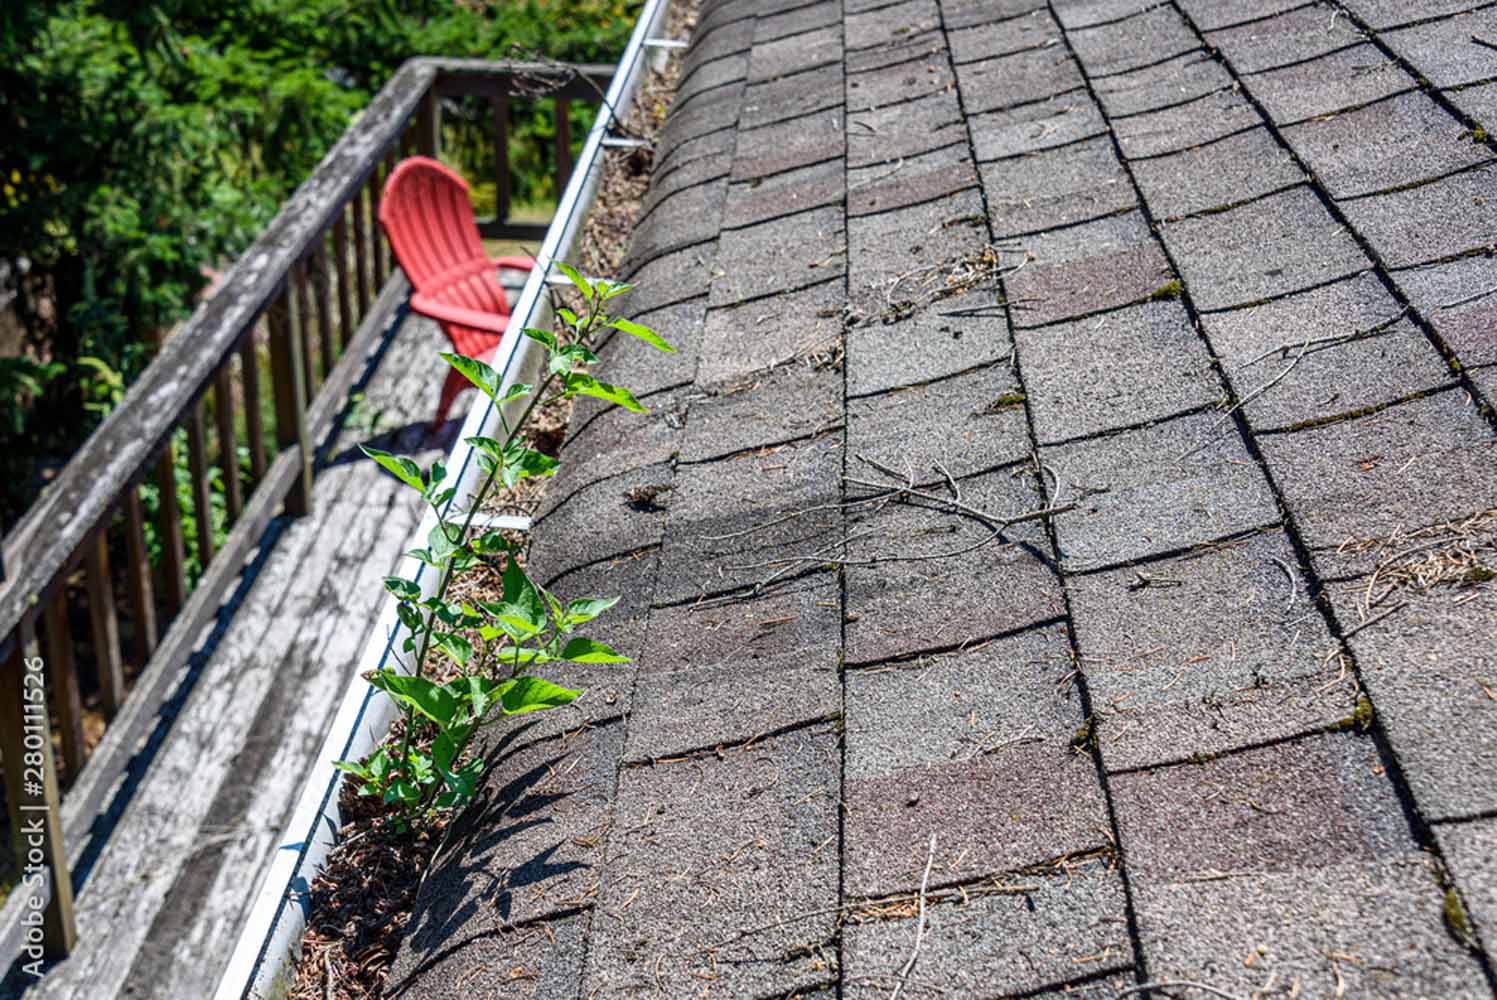 A roof that desperately needs to be cleaned off and have the gutters cleaned out.